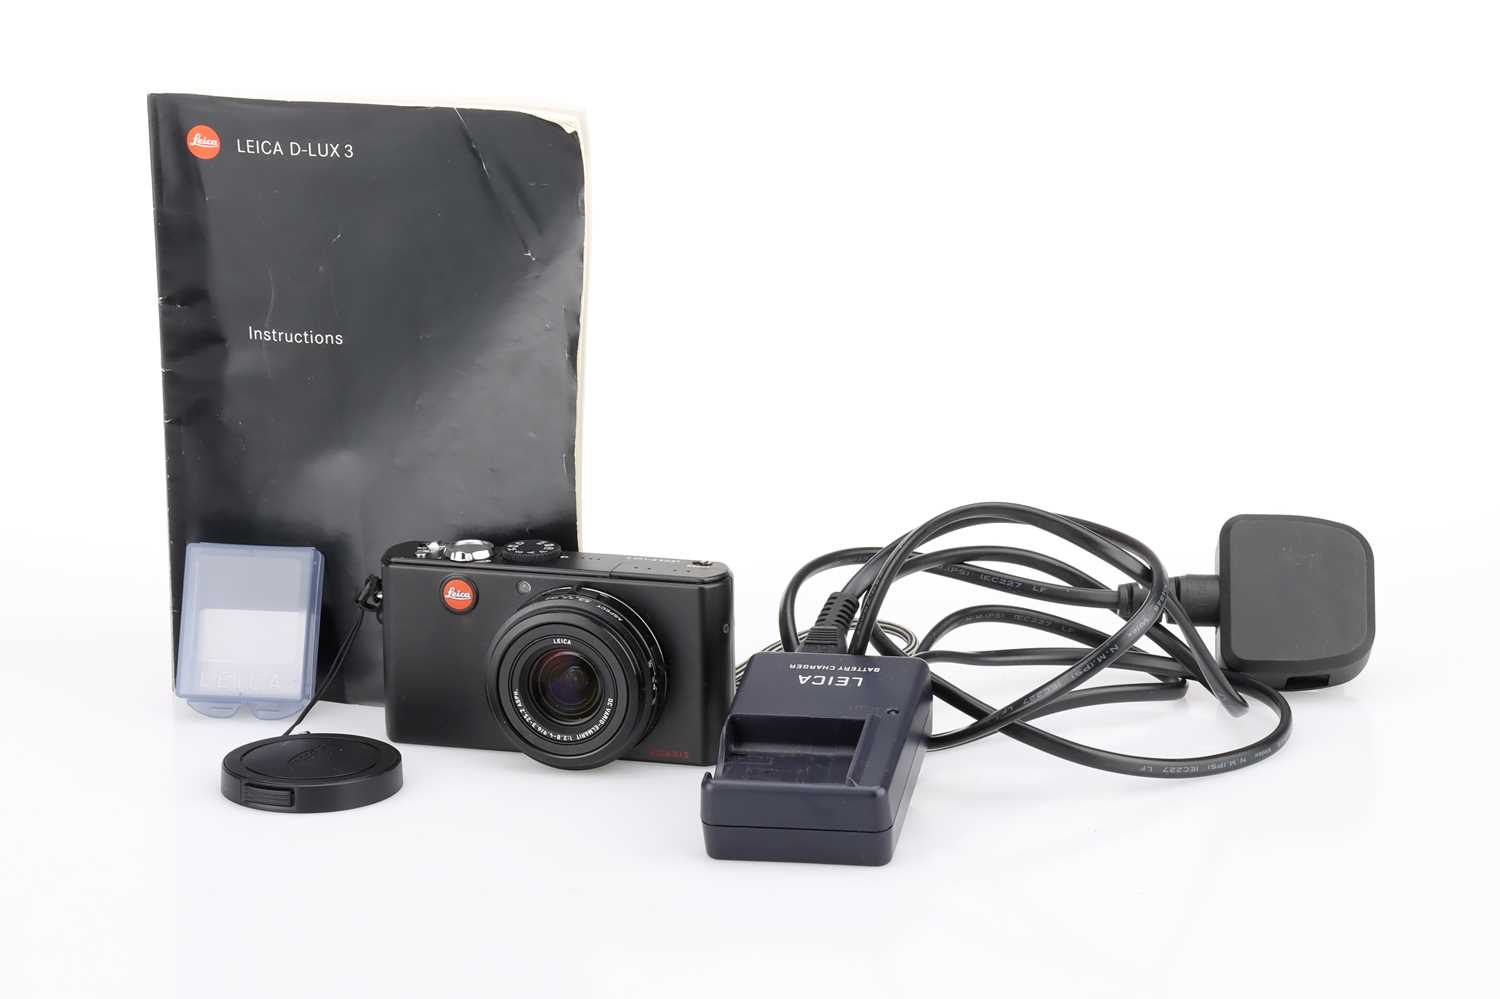 Sold at Auction: A Leica D-Lux 3 Compact Digital Camera